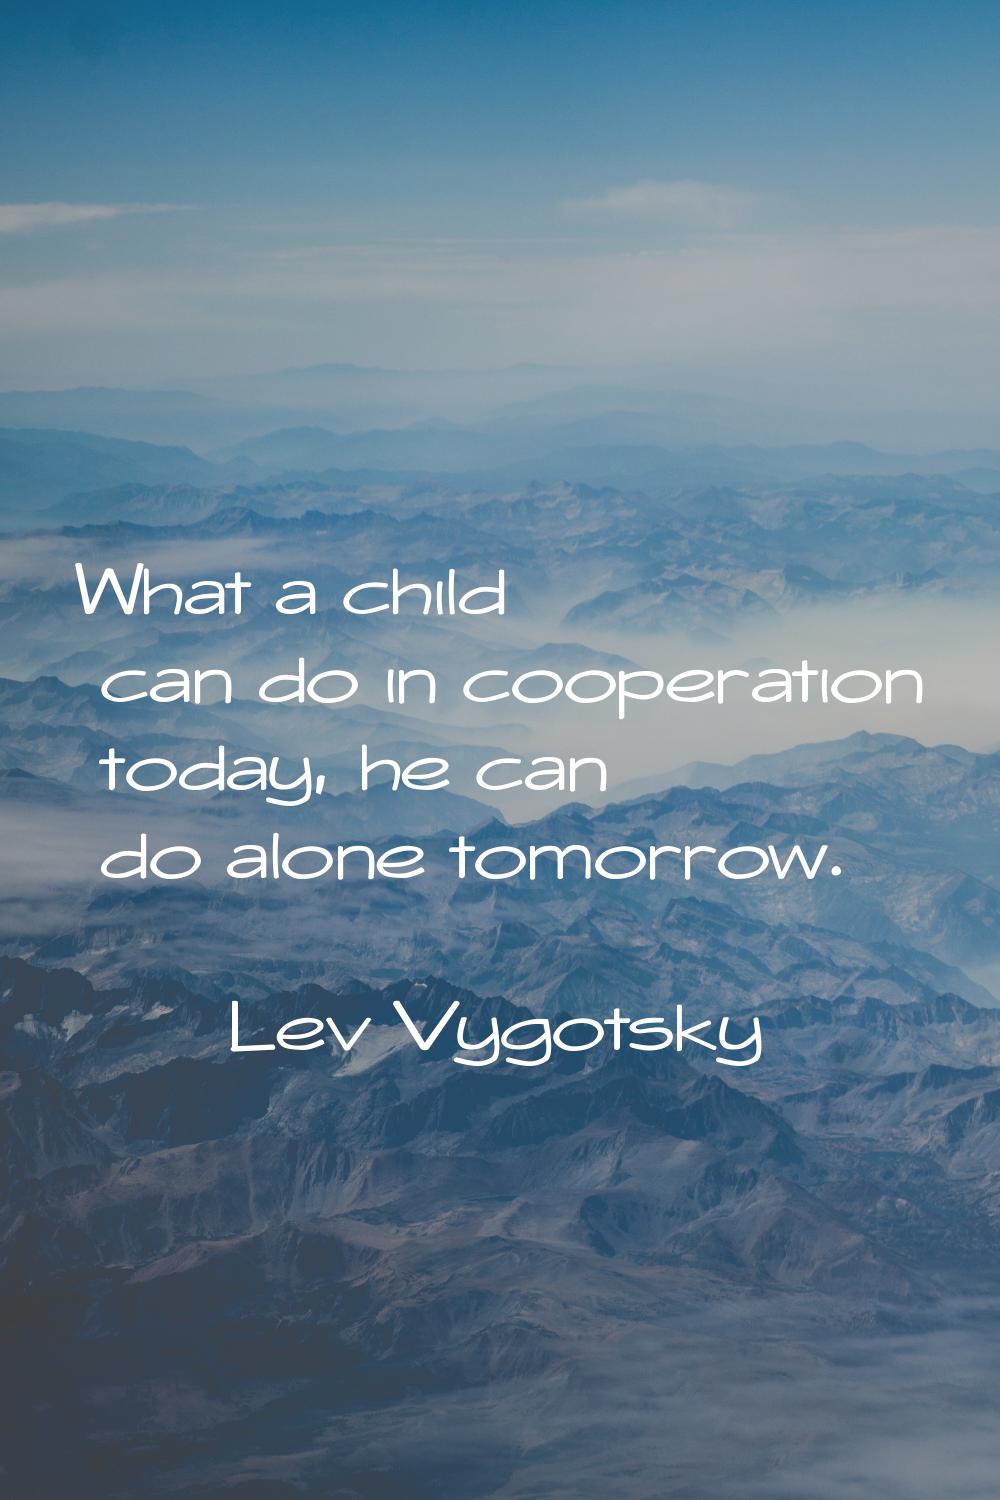 What a child can do in cooperation today, he can do alone tomorrow.